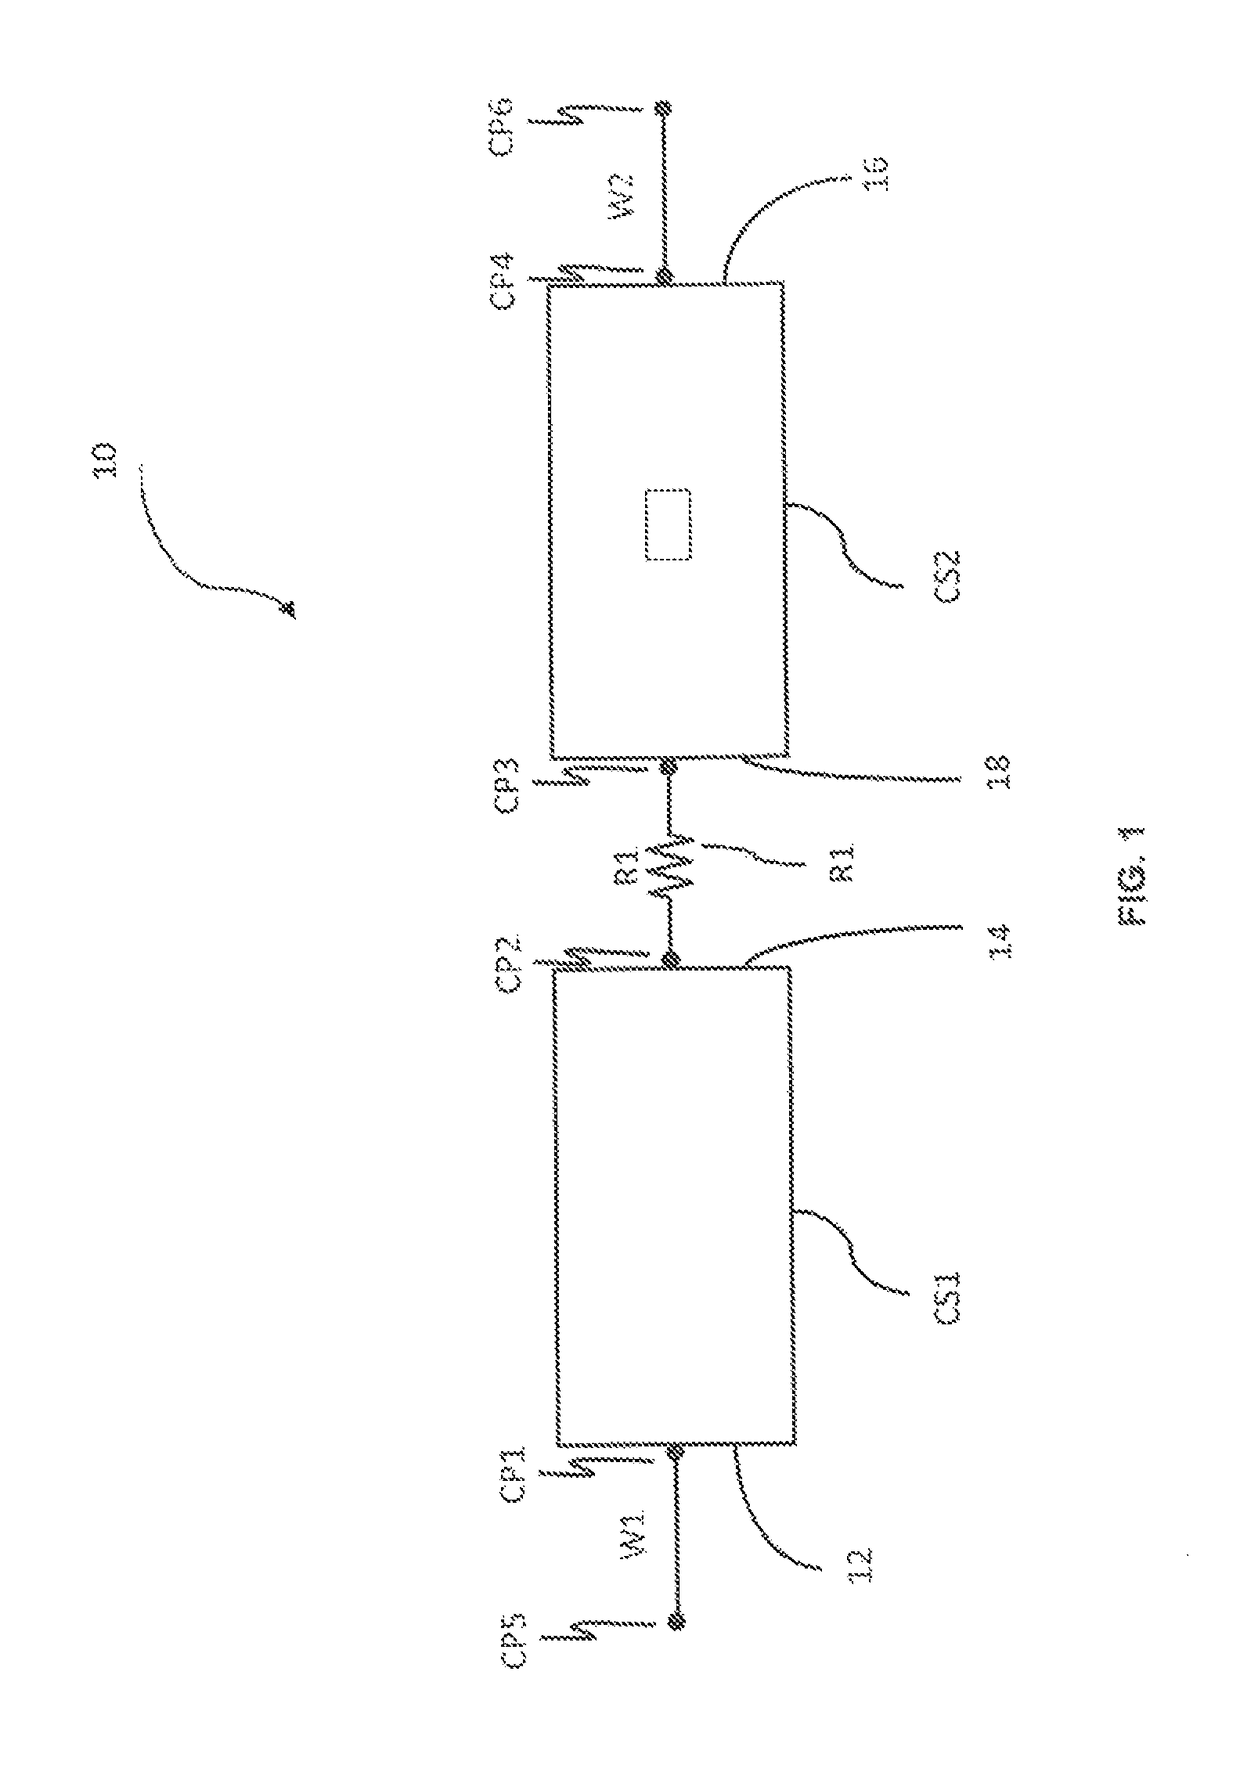 Drift current coulombic storage apparatus